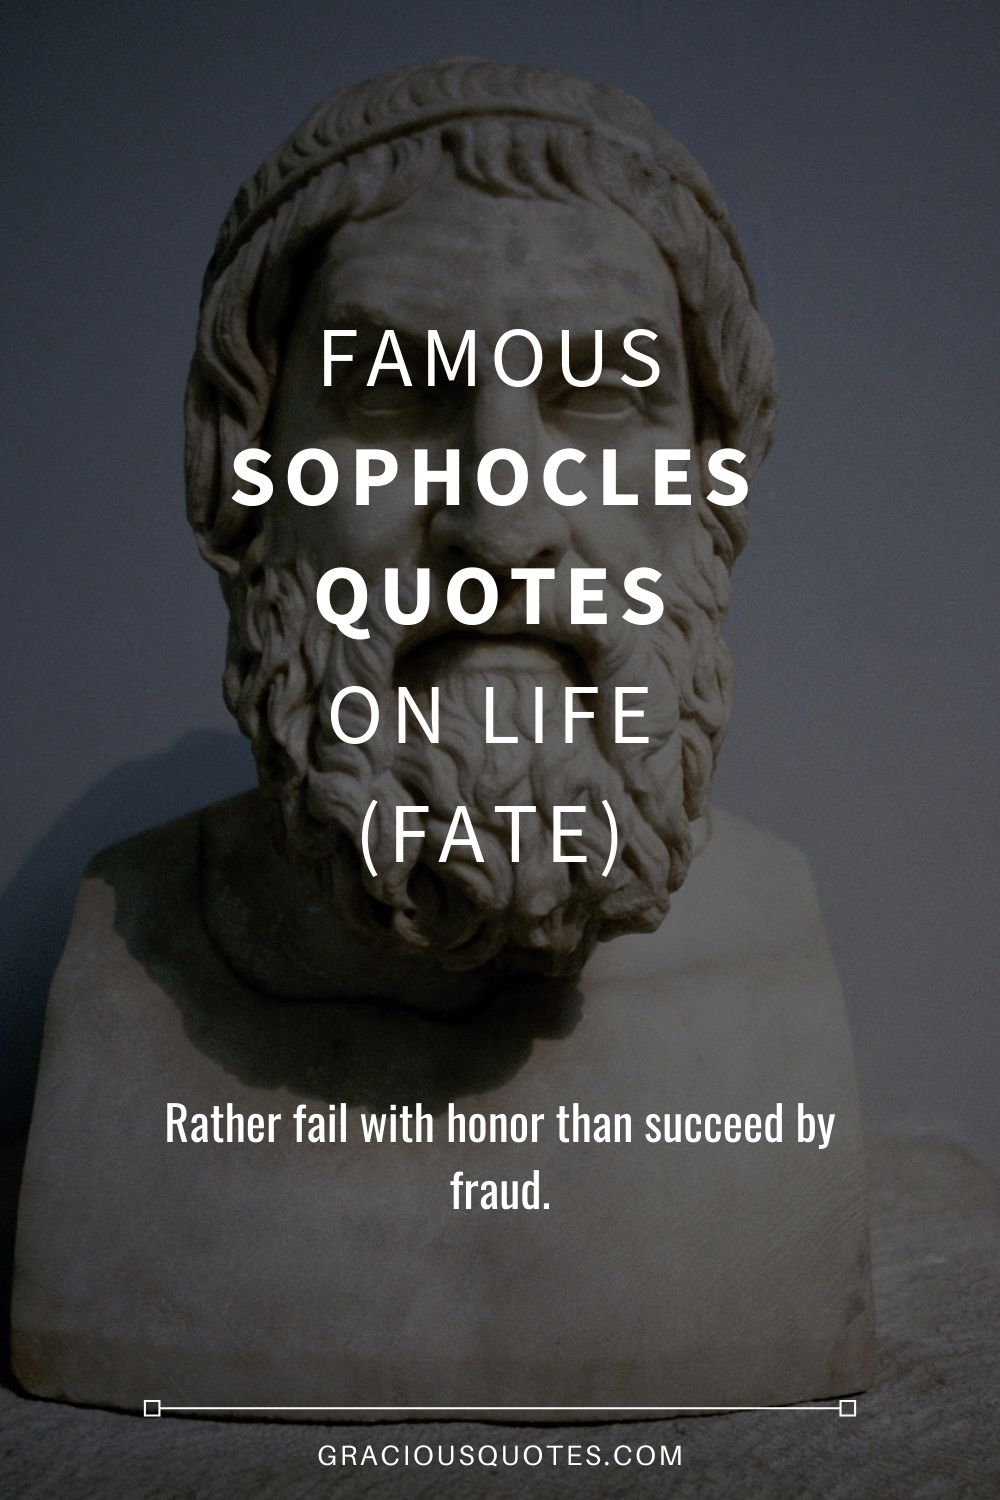 Famous Sophocles Quotes on Life (FATE) - Gracious Quotes